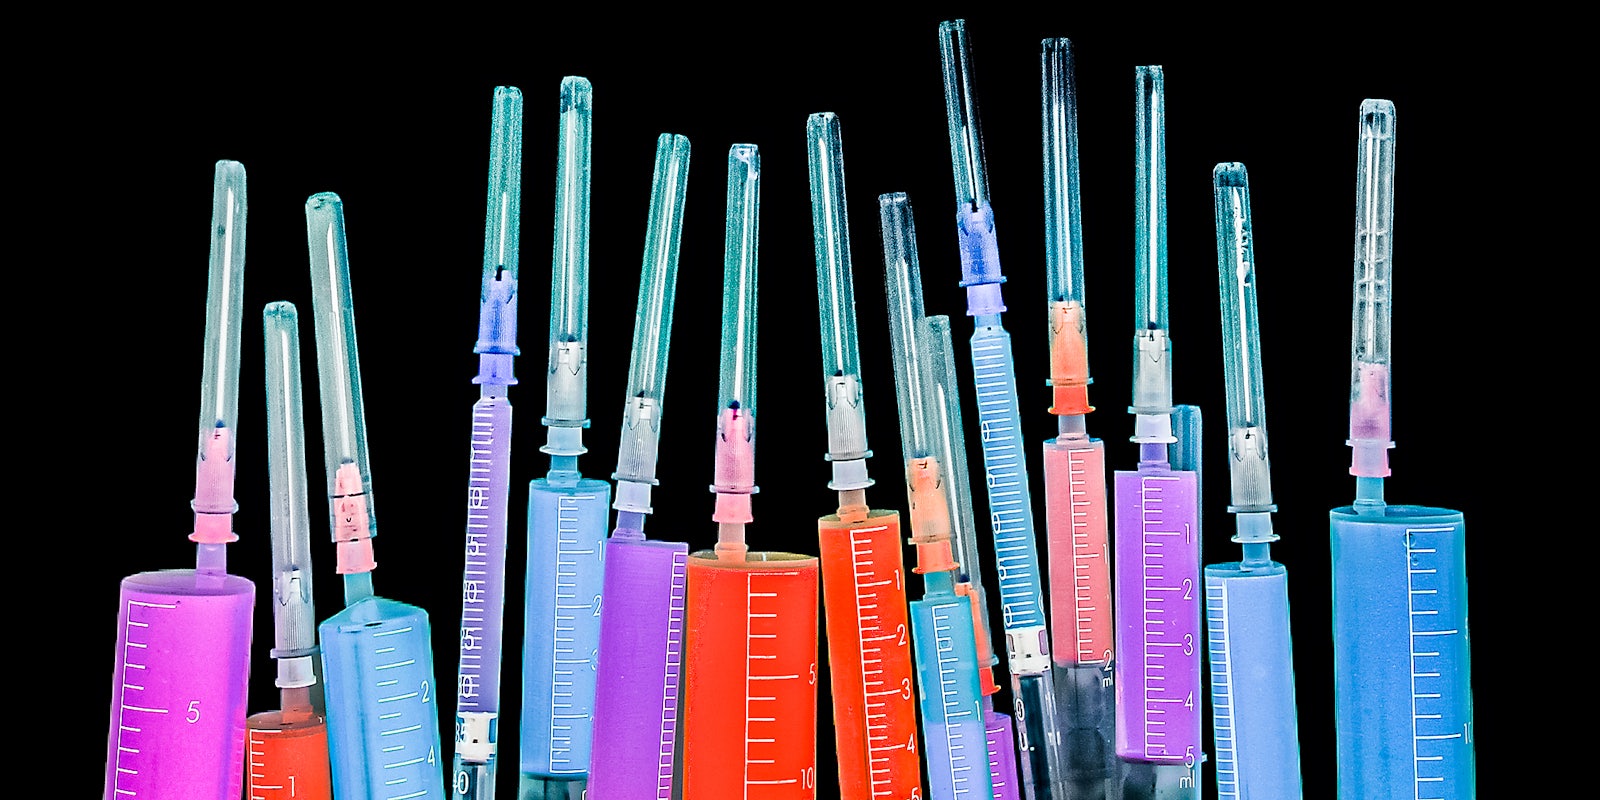 Neon colored syringes.